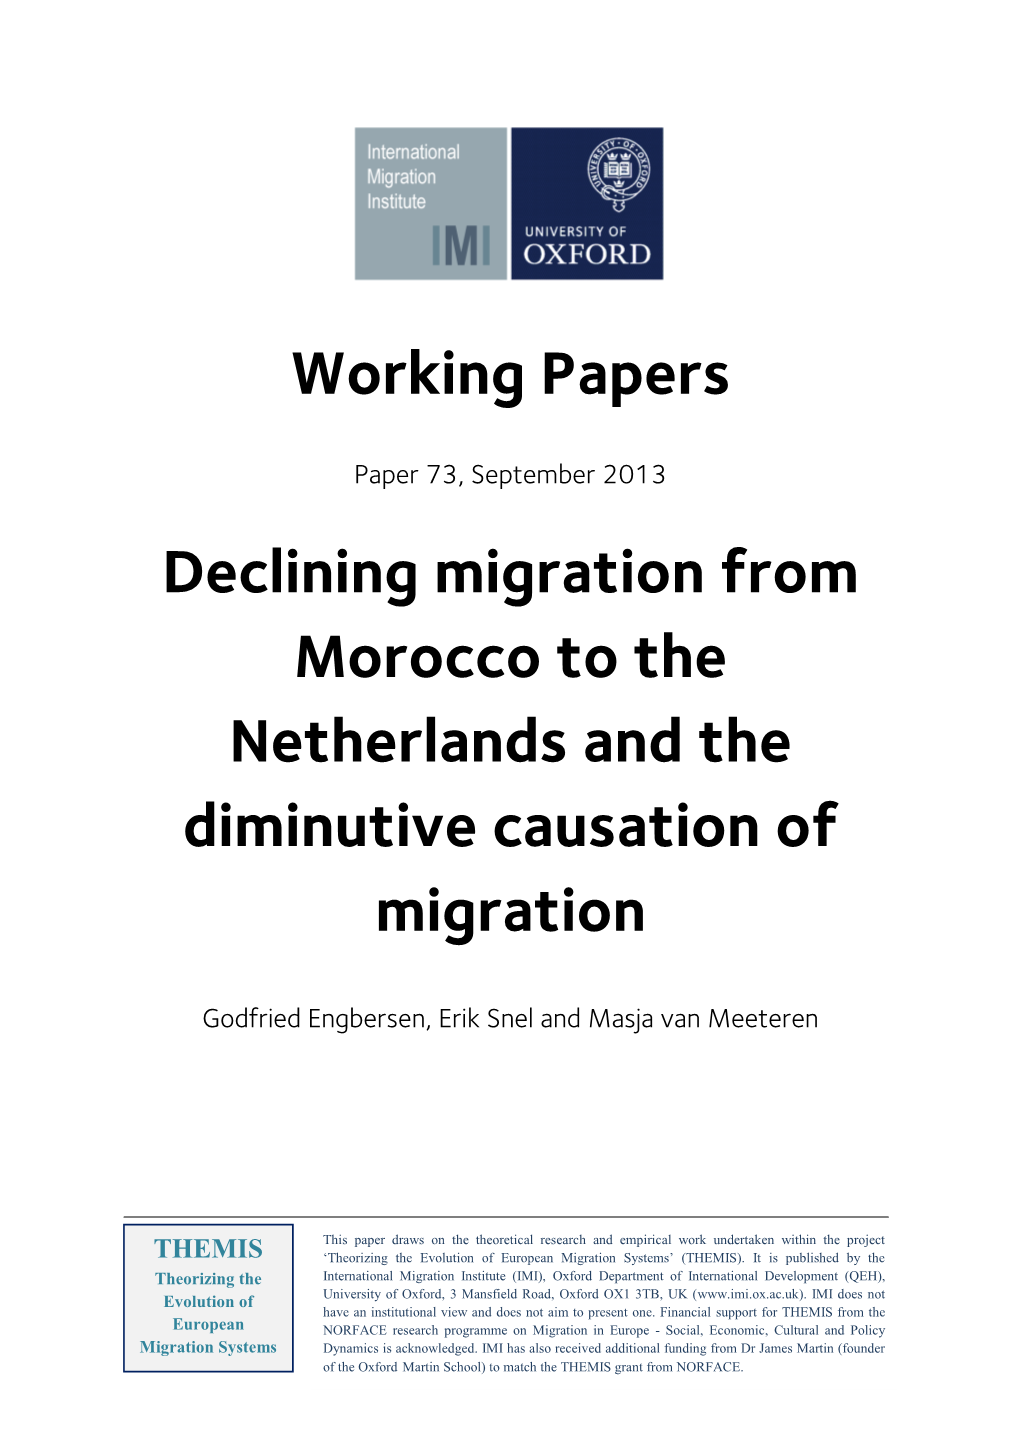 Working Papers Declining Migration from Morocco to the Netherlands